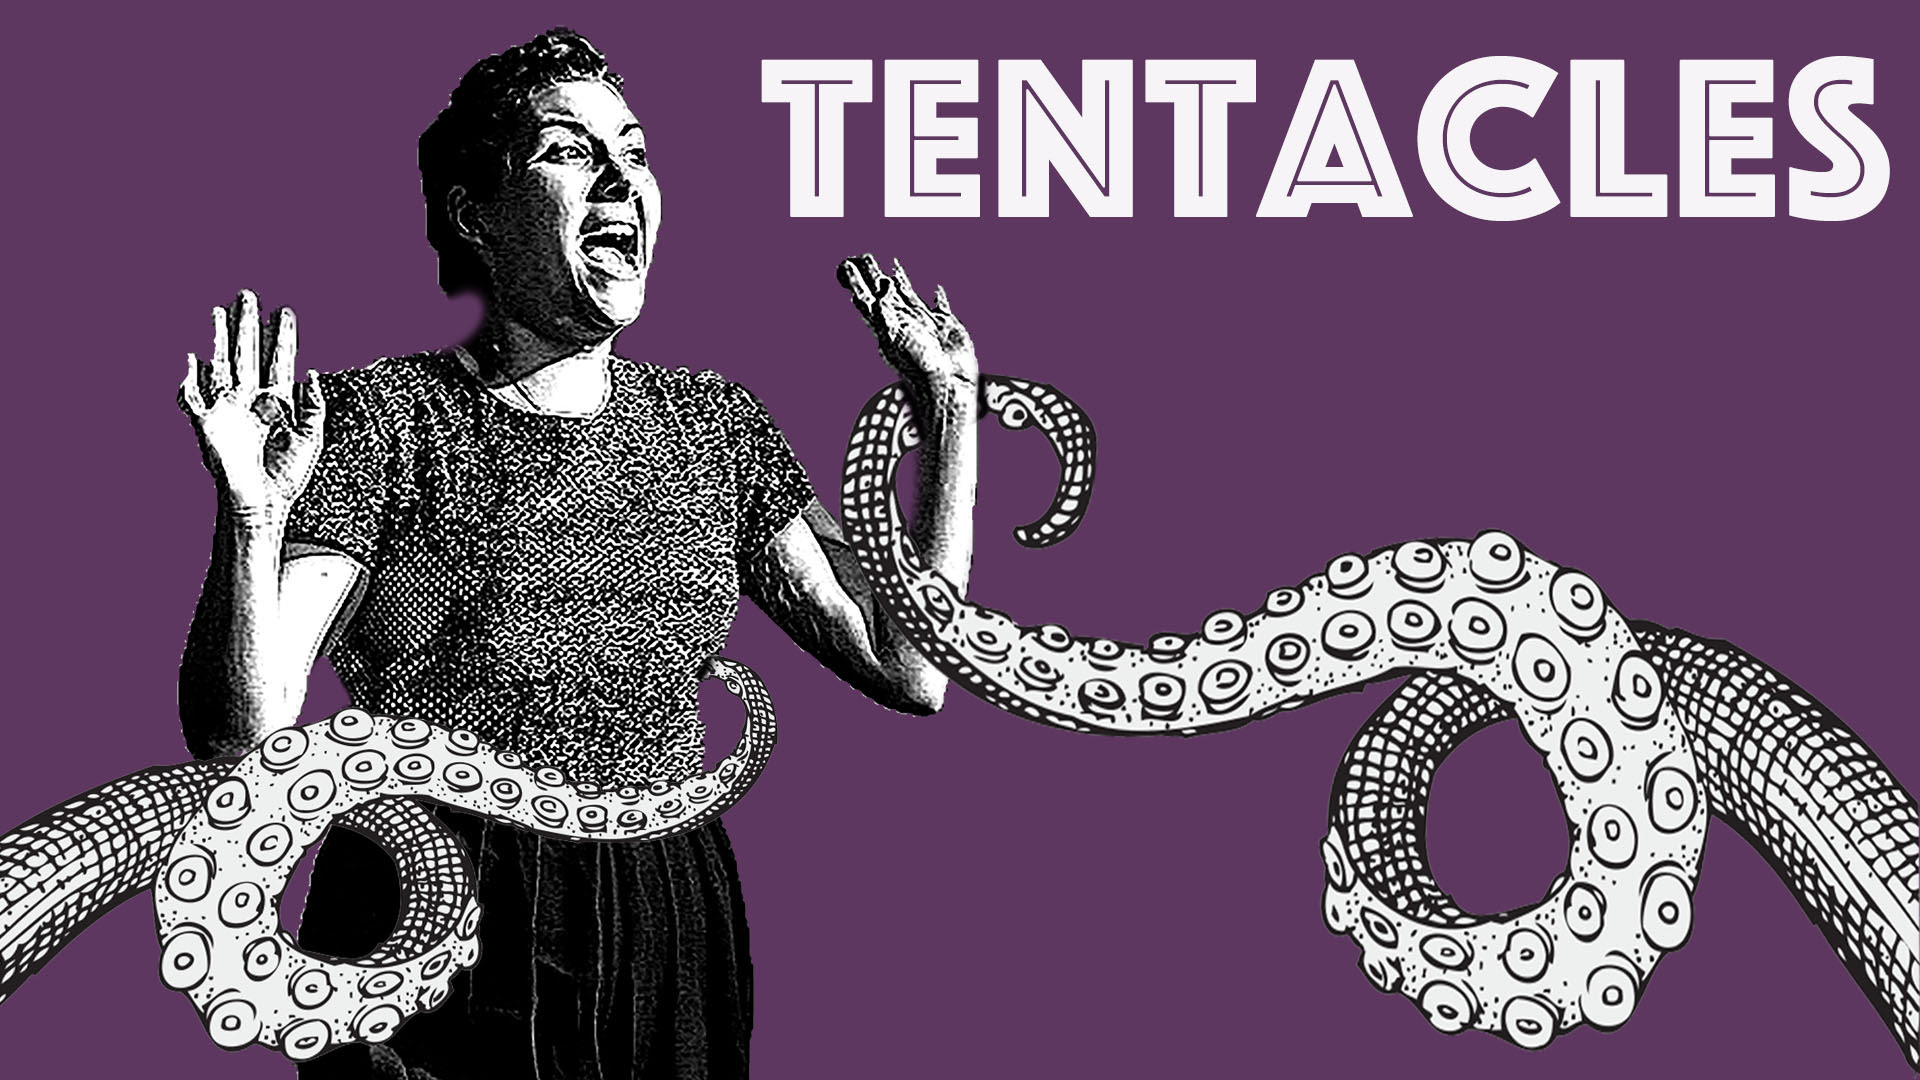 Tentacles (2018) | Voyage Theater Company